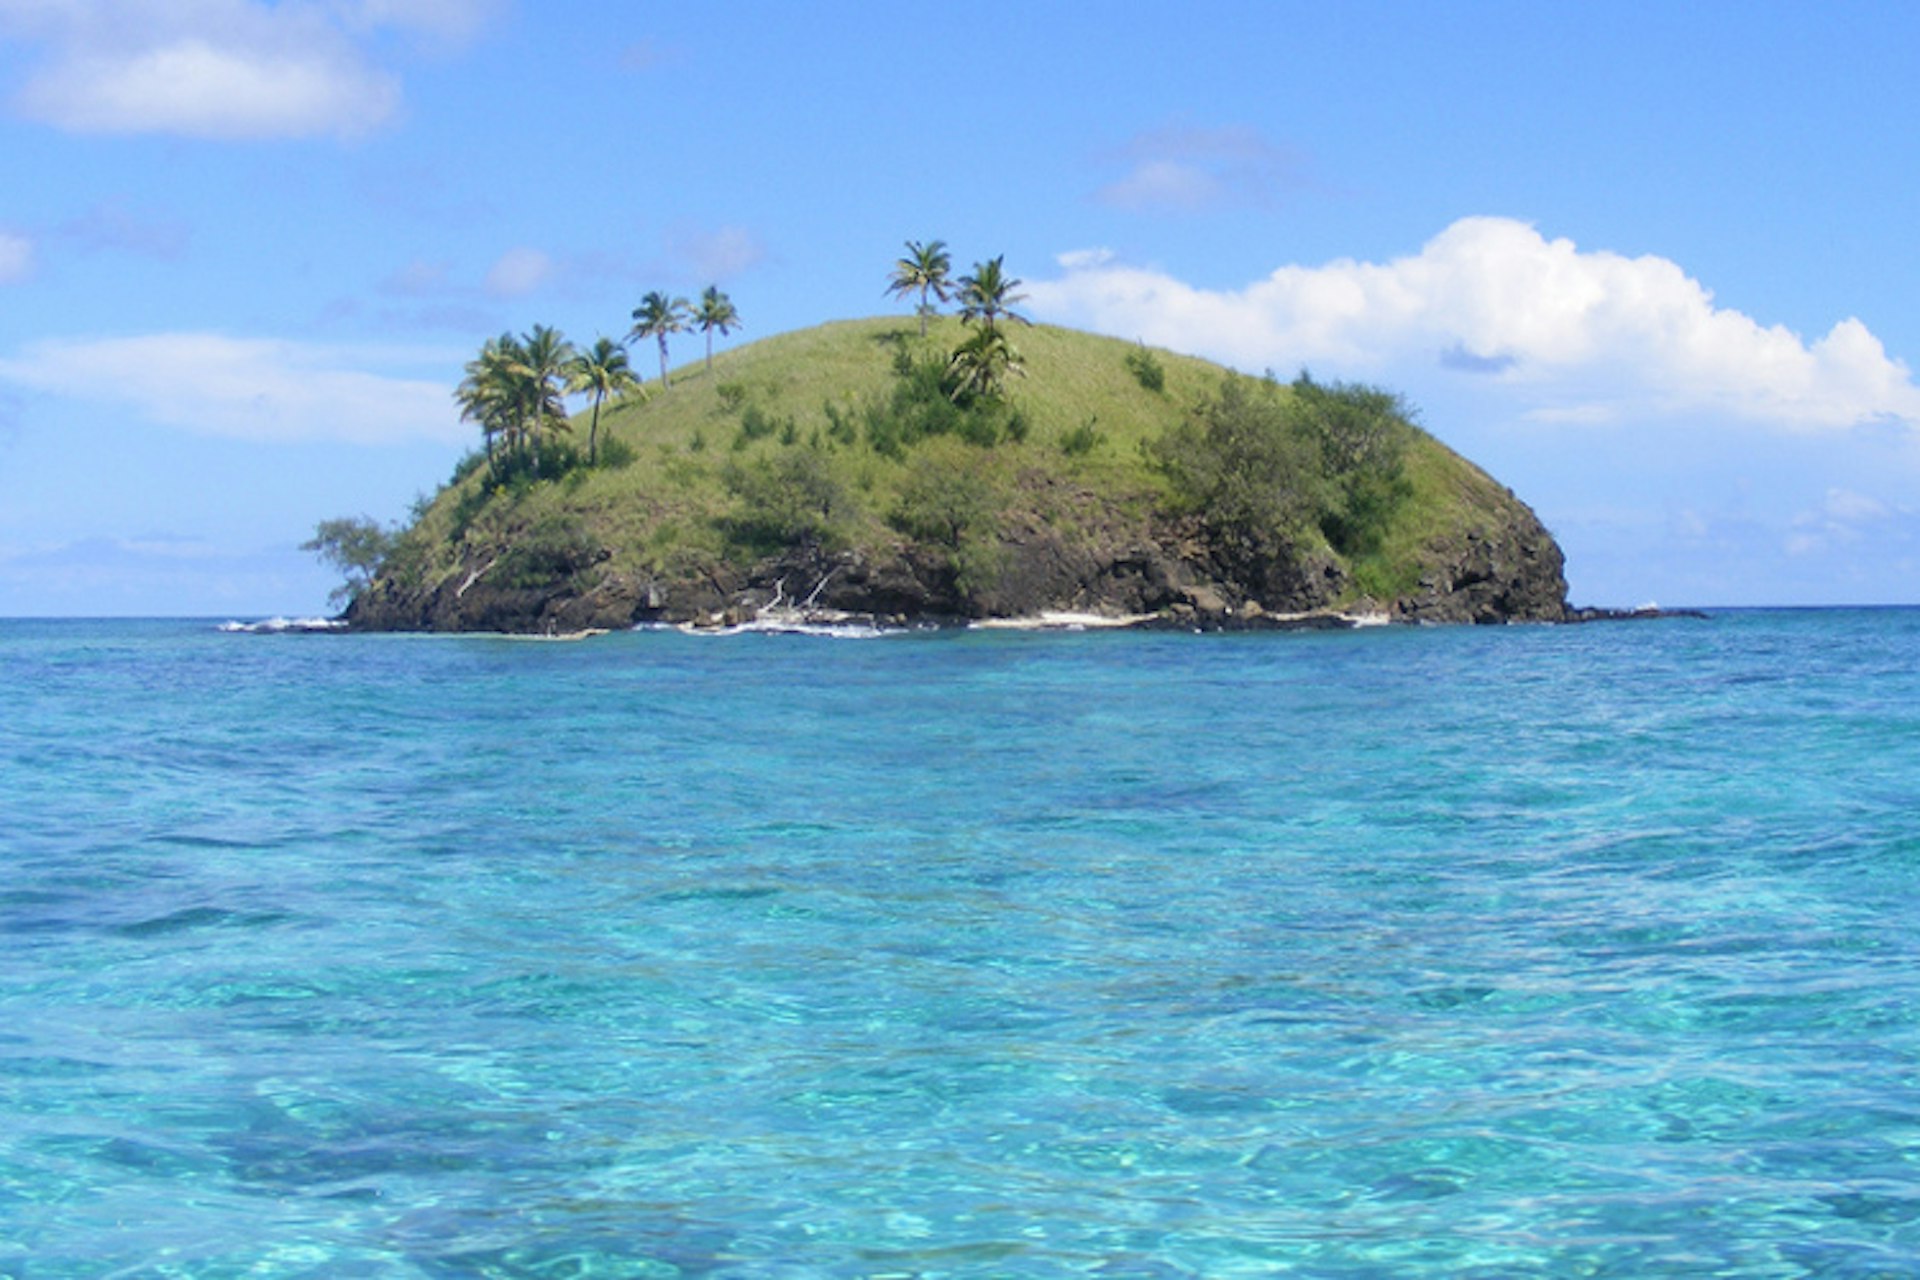 Island in western Fiji surround by crystal clear waters. Image by Chris Isherwood / CC by SA 2.0